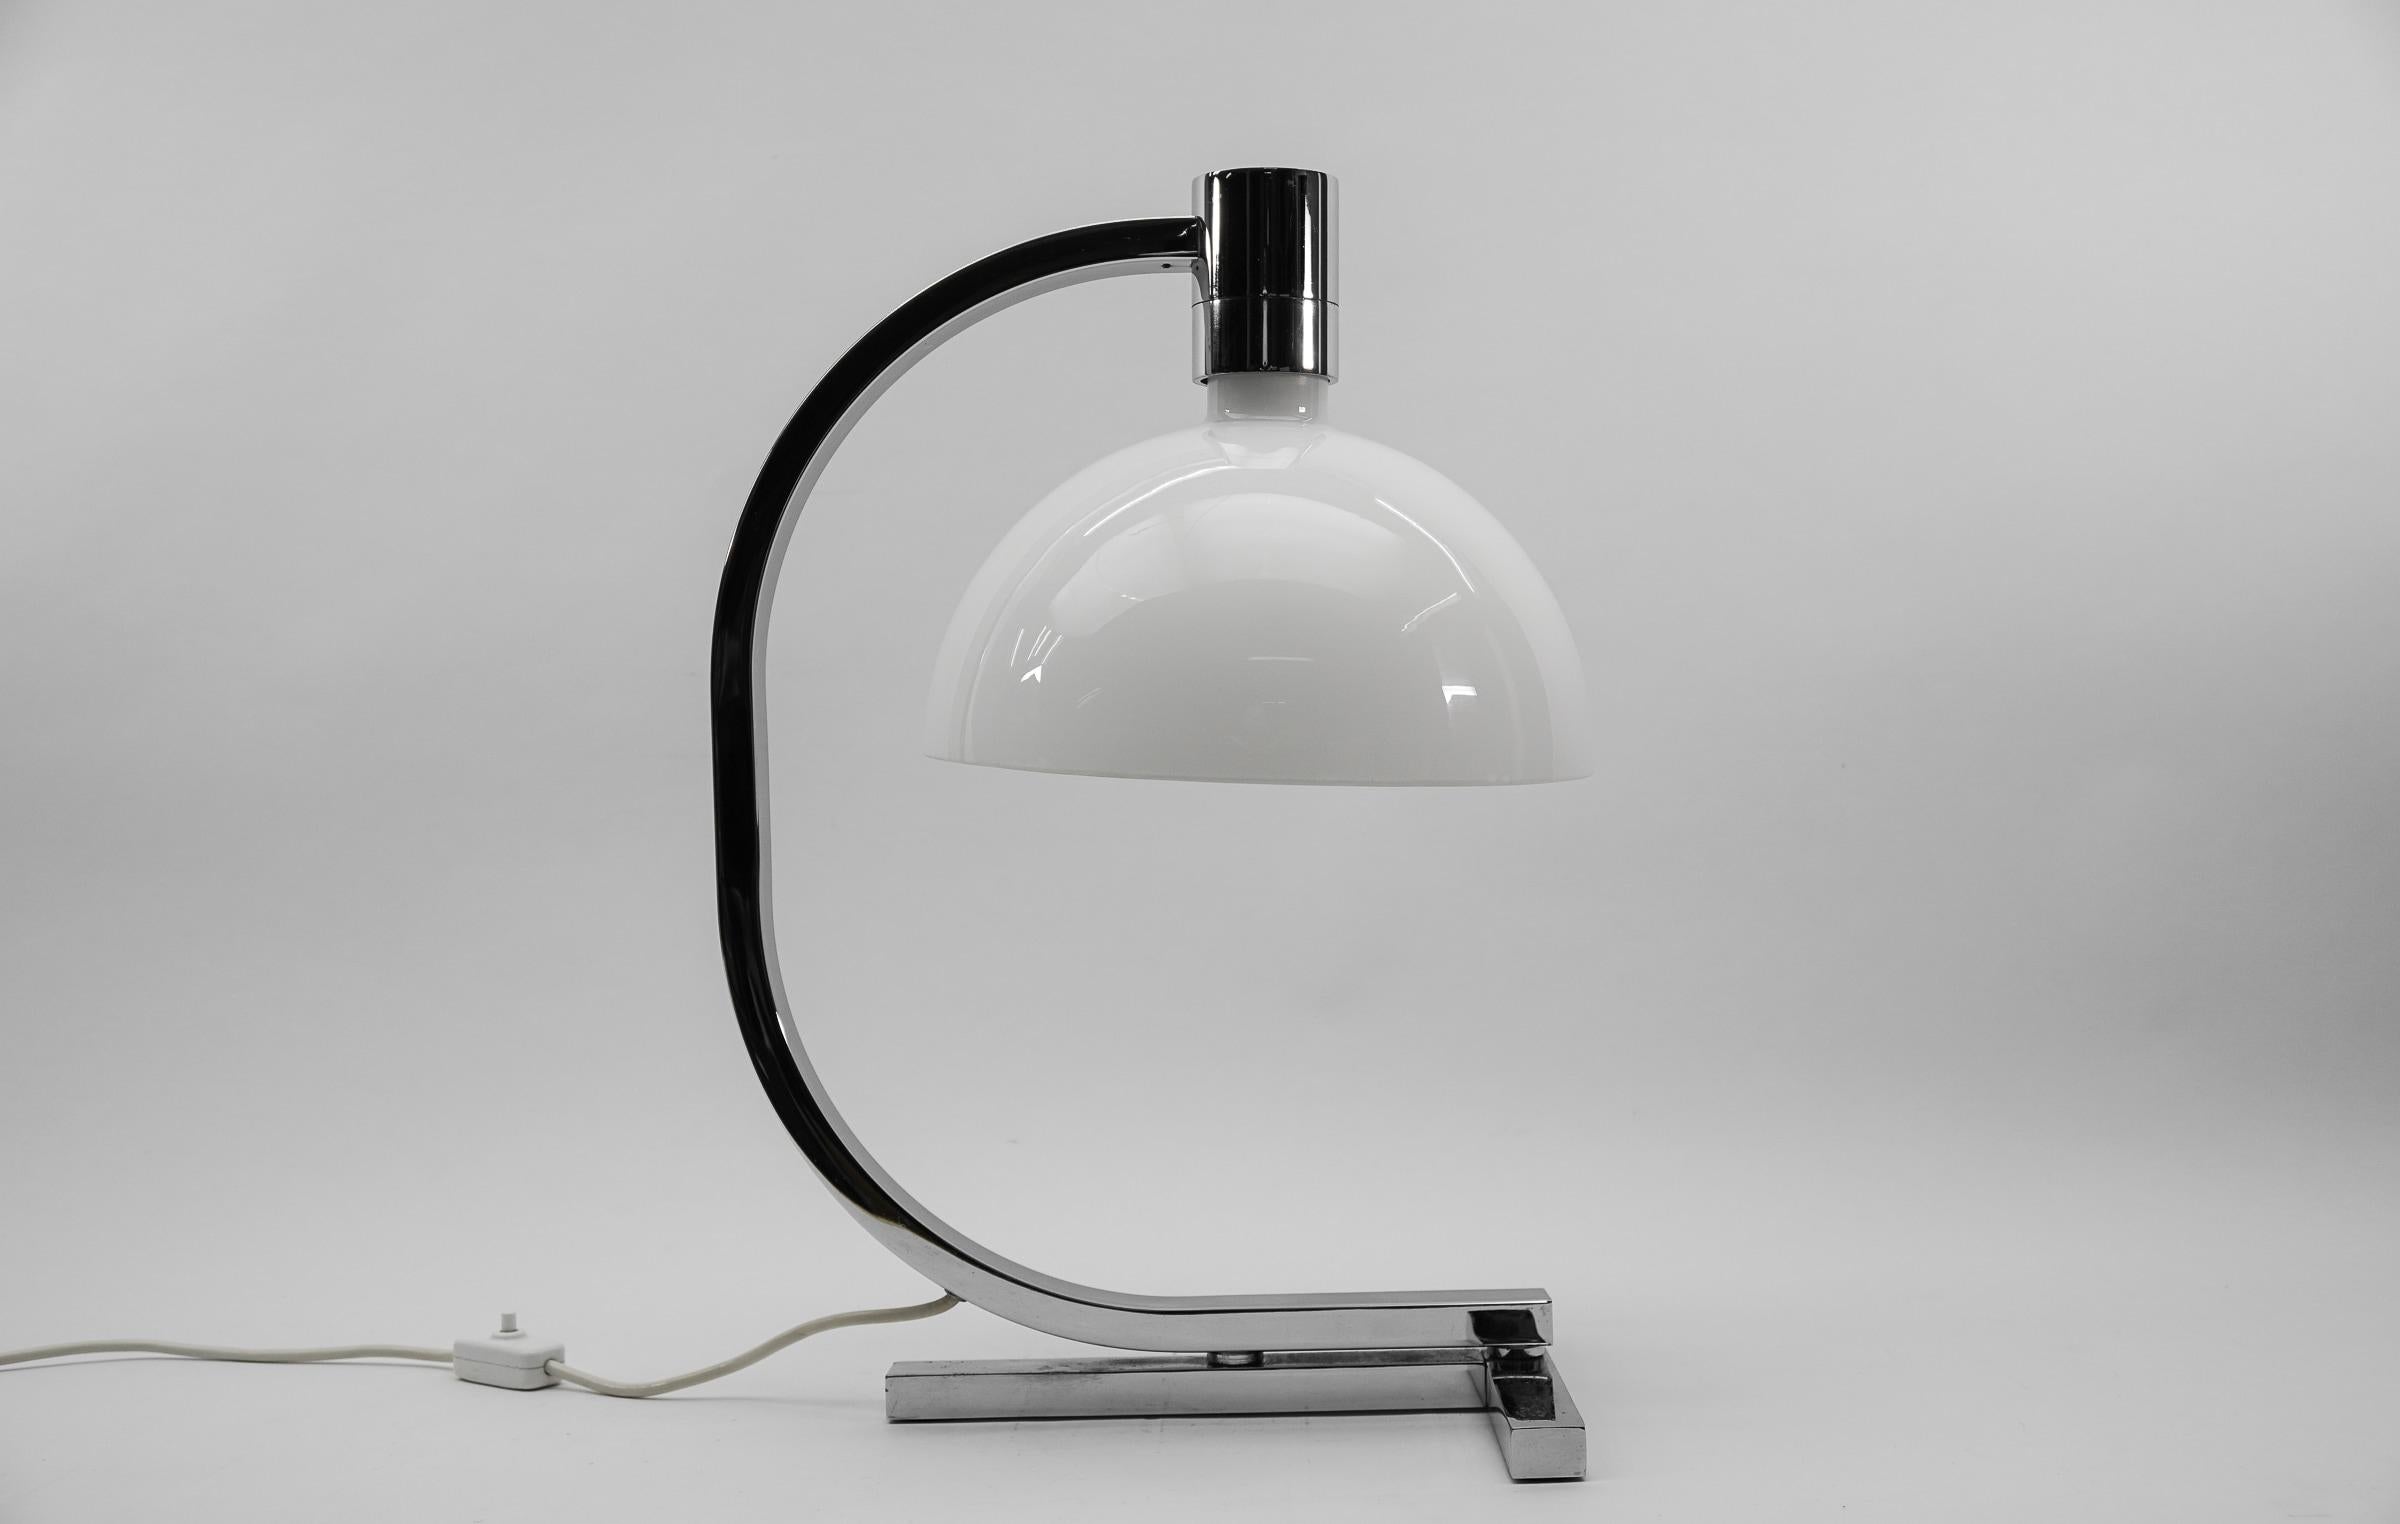 Desk Lamp by Franco Albini, Franca Helg & Antonio Piva for Sirrah, Italy 1960s

The lamp needs 1 x E27 / E26 Edison screw fit bulb, is wired, and in working condition. It runs both on 110 / 230 volt.